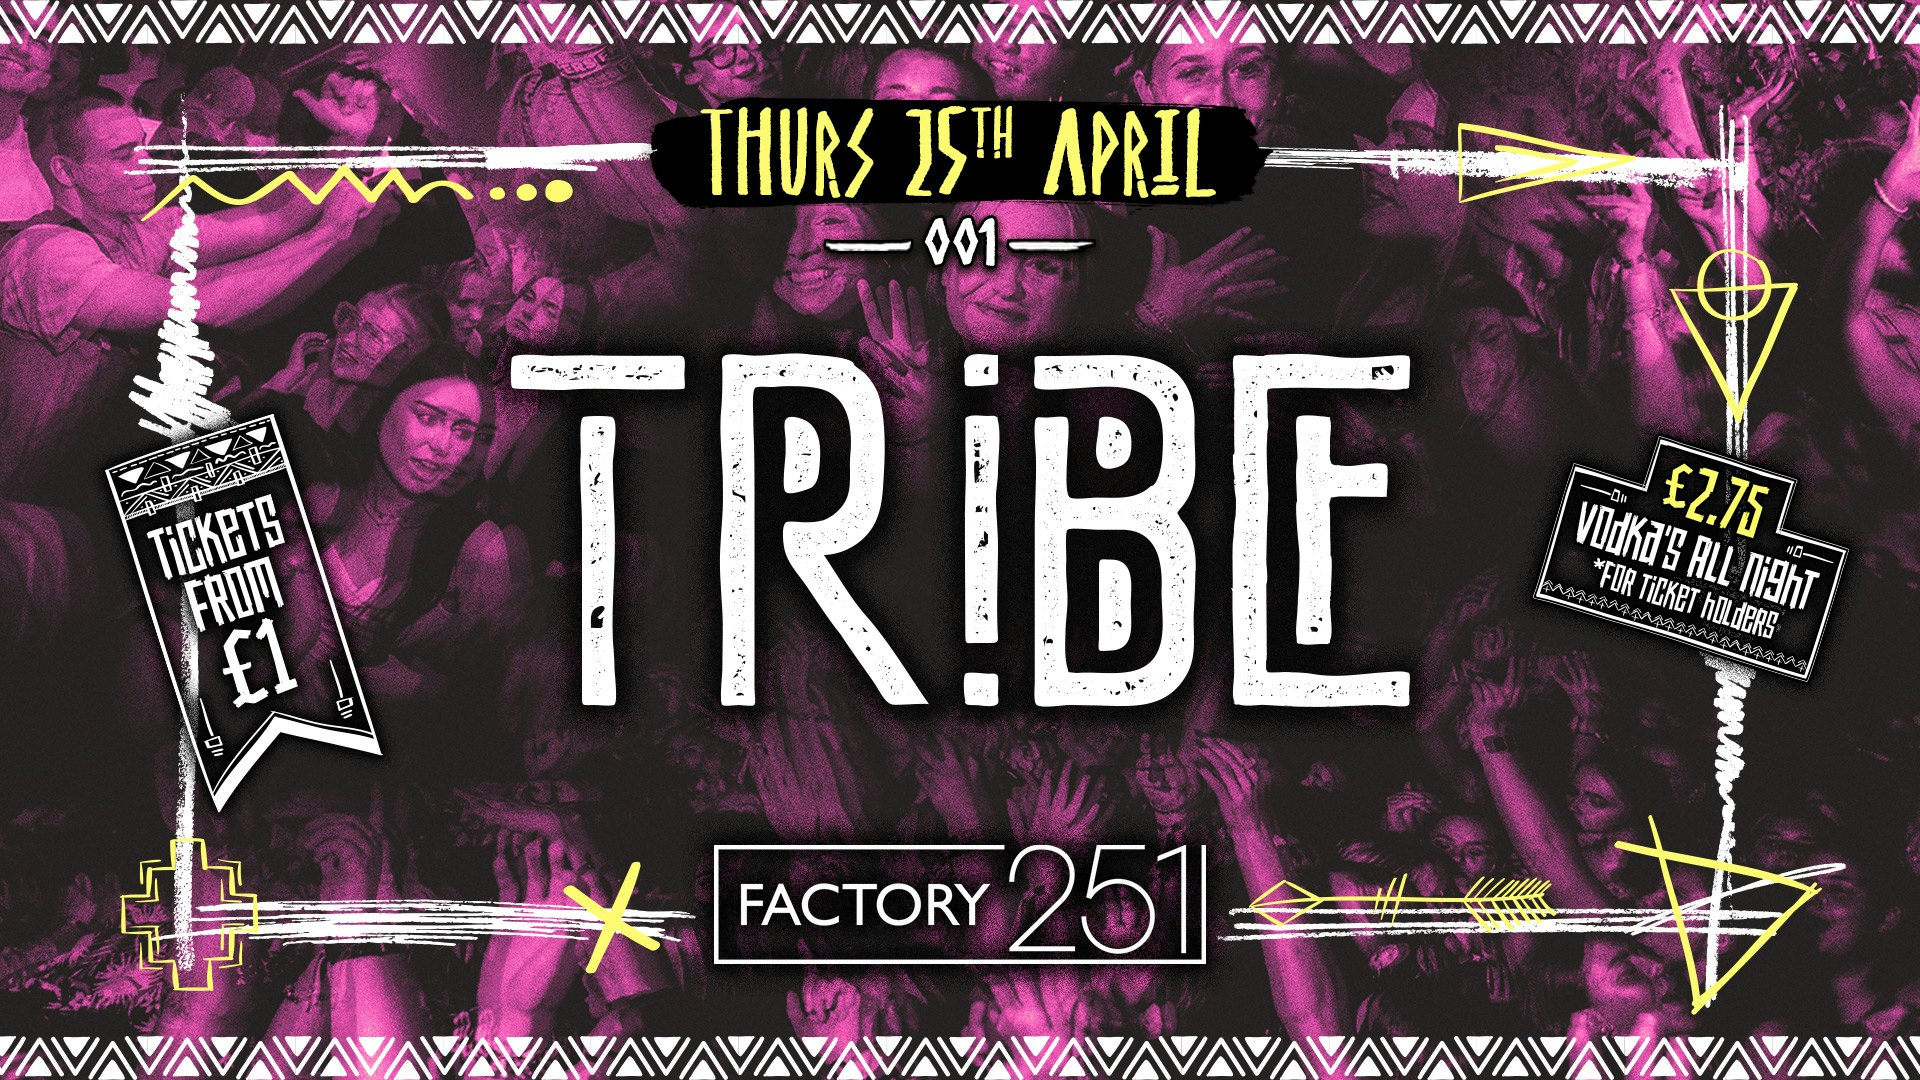 TRIBE 🌴 @ FACTORY | THURSDAY LAUNCH #001 | INTRODUCING ‘THE BOILER ROOM’ 🎶 HUGE CAPACITY VENUE 🔺 £2.75 Vodka’s All Night for Ticket Holders |